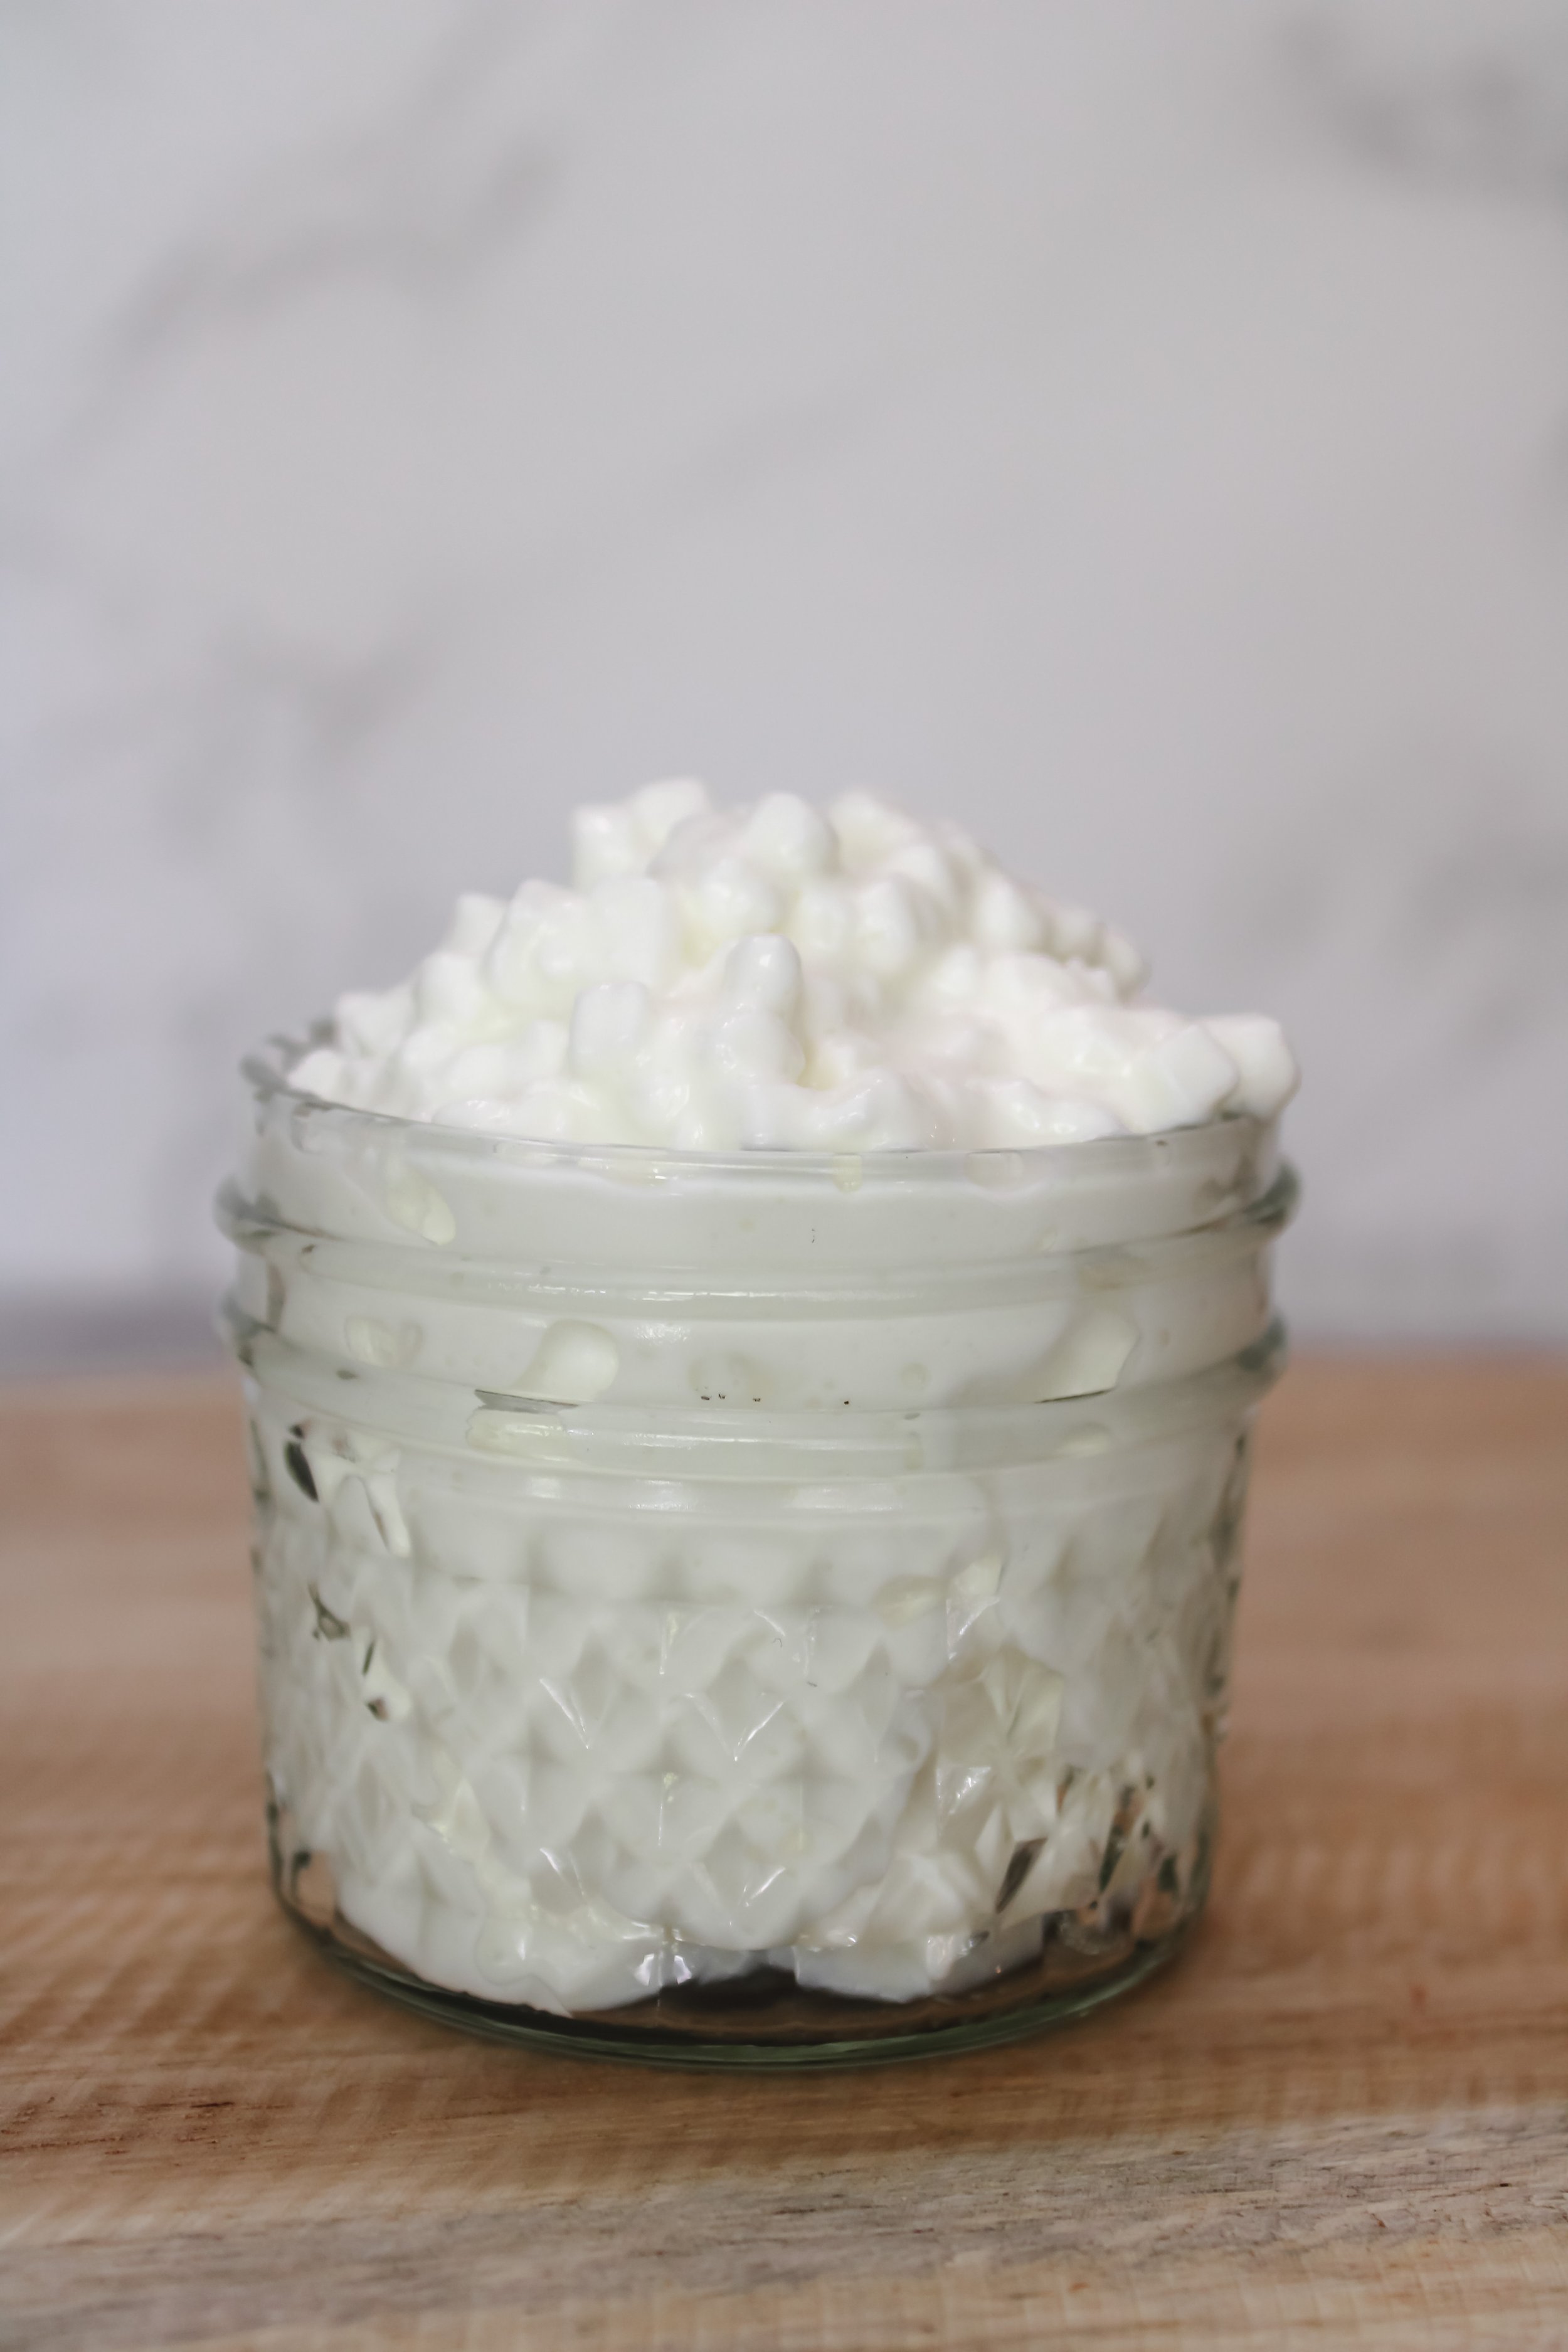 10 Cottage Cheese Ideas